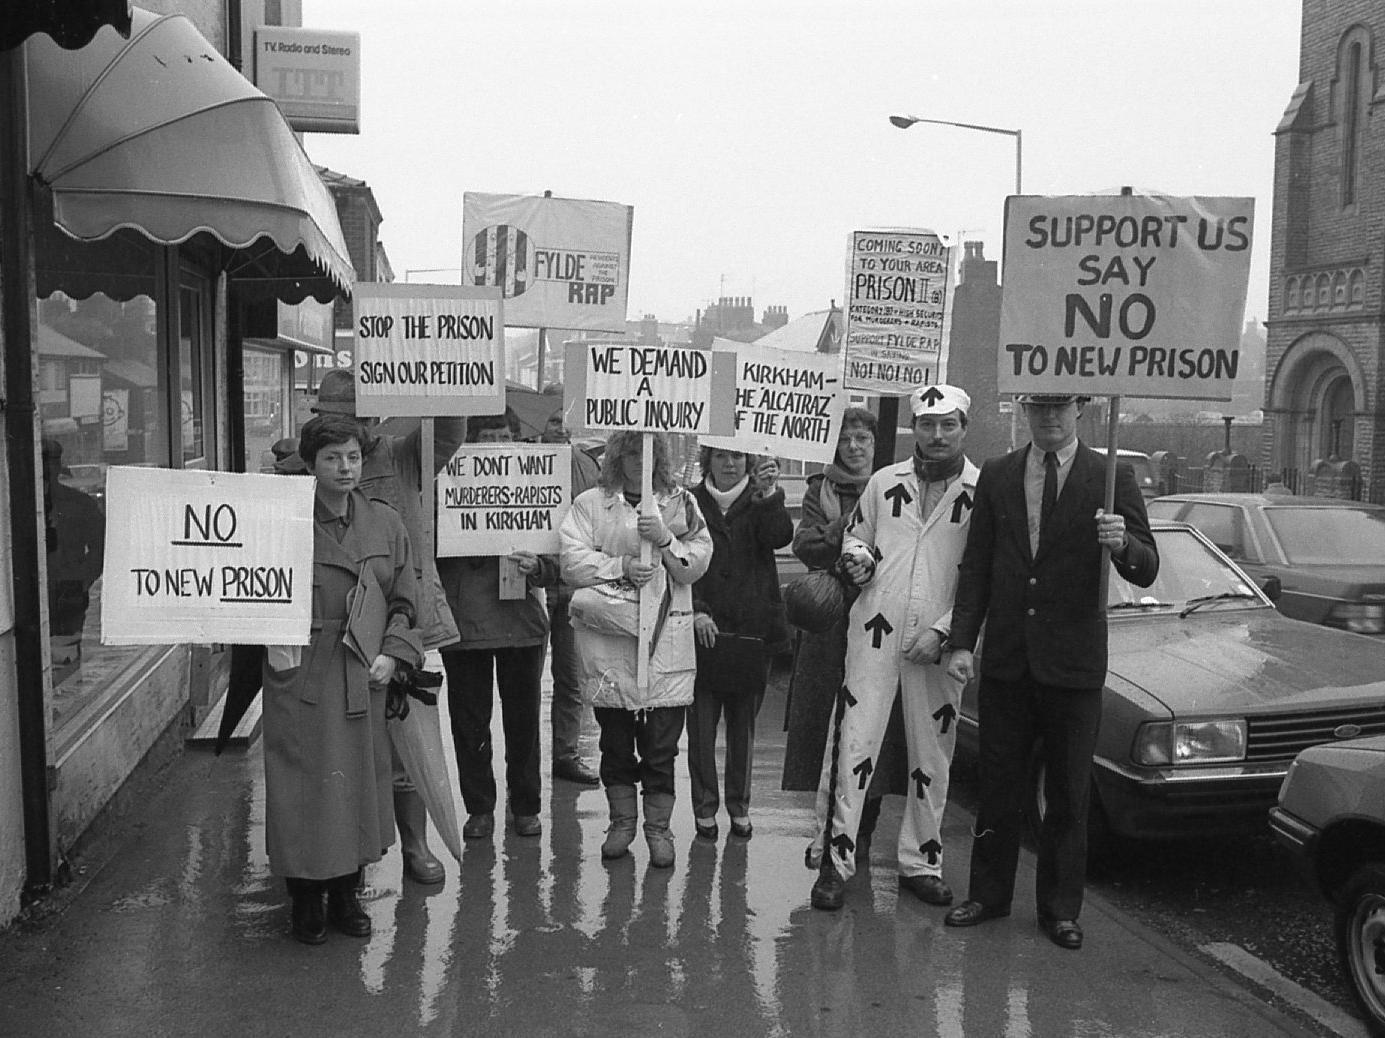 Residents of a Lancashire town took the streets to protest at plans for a high-security prison to be built on their doorsteps. Fylde RAP (Residents Against the Prison) braved the rain to tour round the centre of Kirkham collecting signatures for a petition and make local people aware of the scale of the proposed prison next to the Open Prison in the town